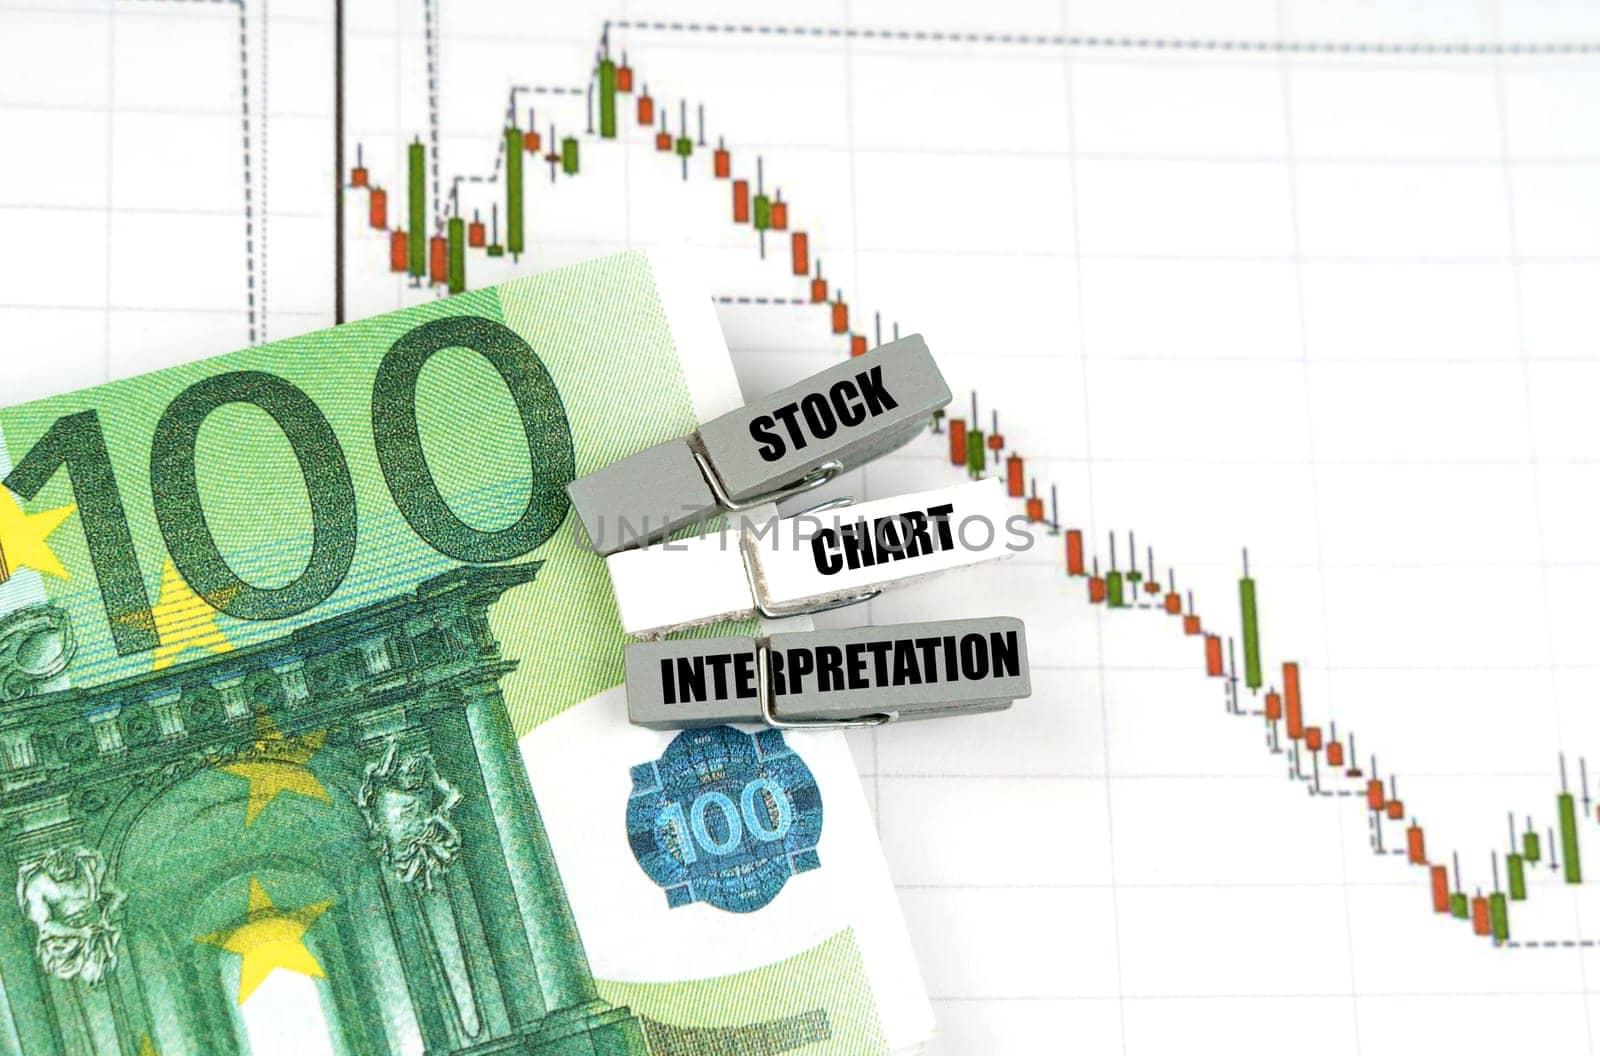 On the quote chart there are euros and clothespins with the inscription - Stock Chart Interpretation by Sd28DimoN_1976